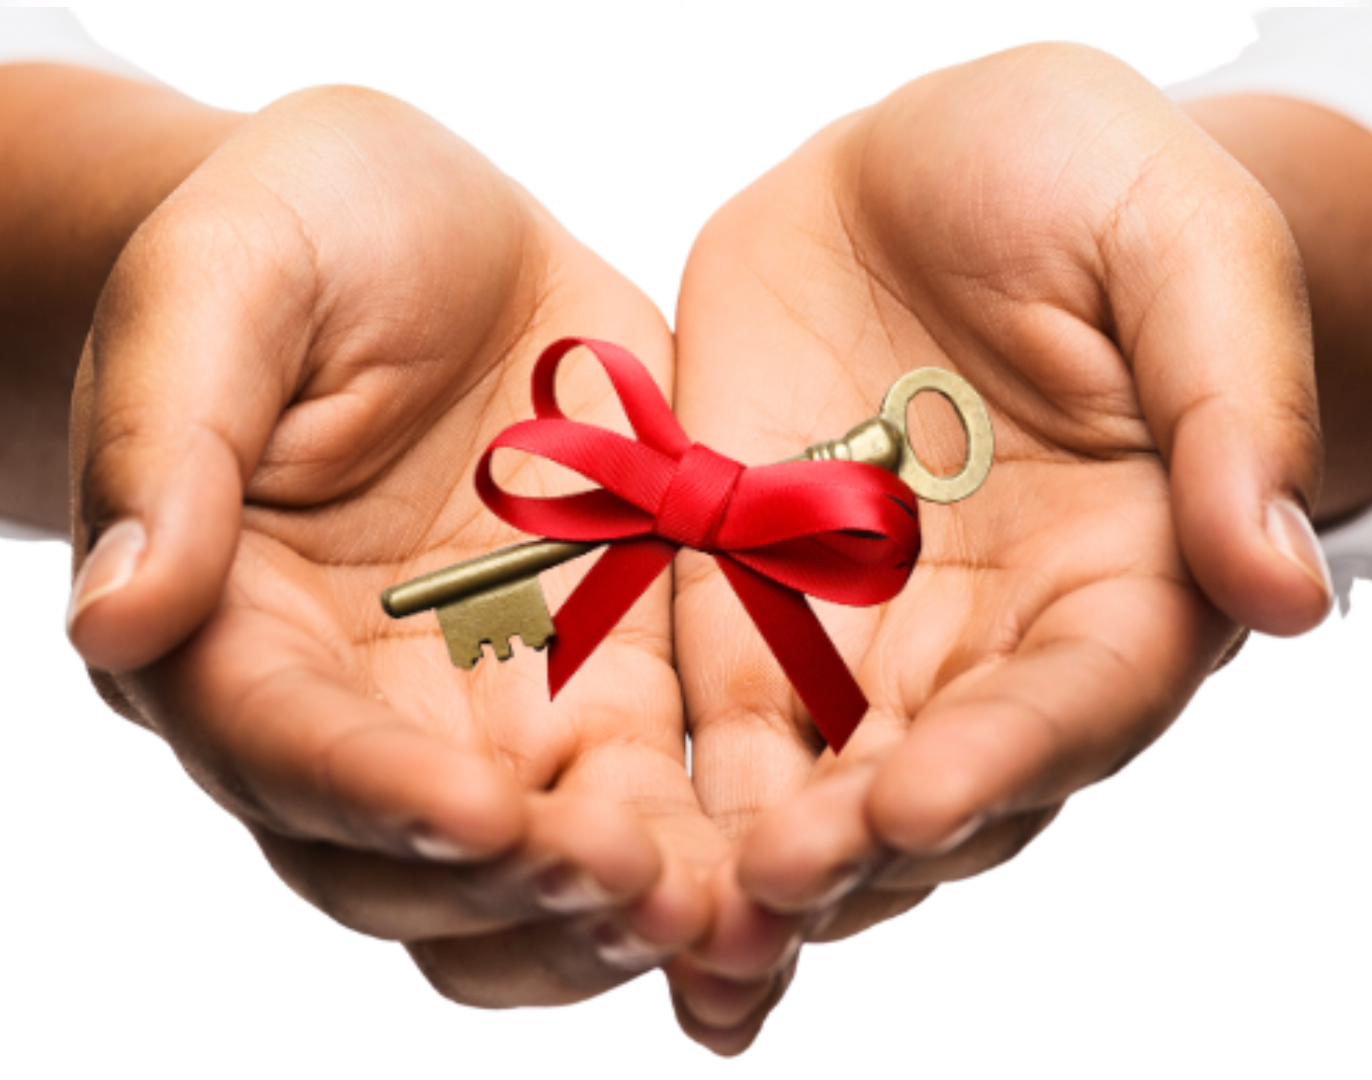 This is a picture of hands holding a key with a red ribbon tied around it.